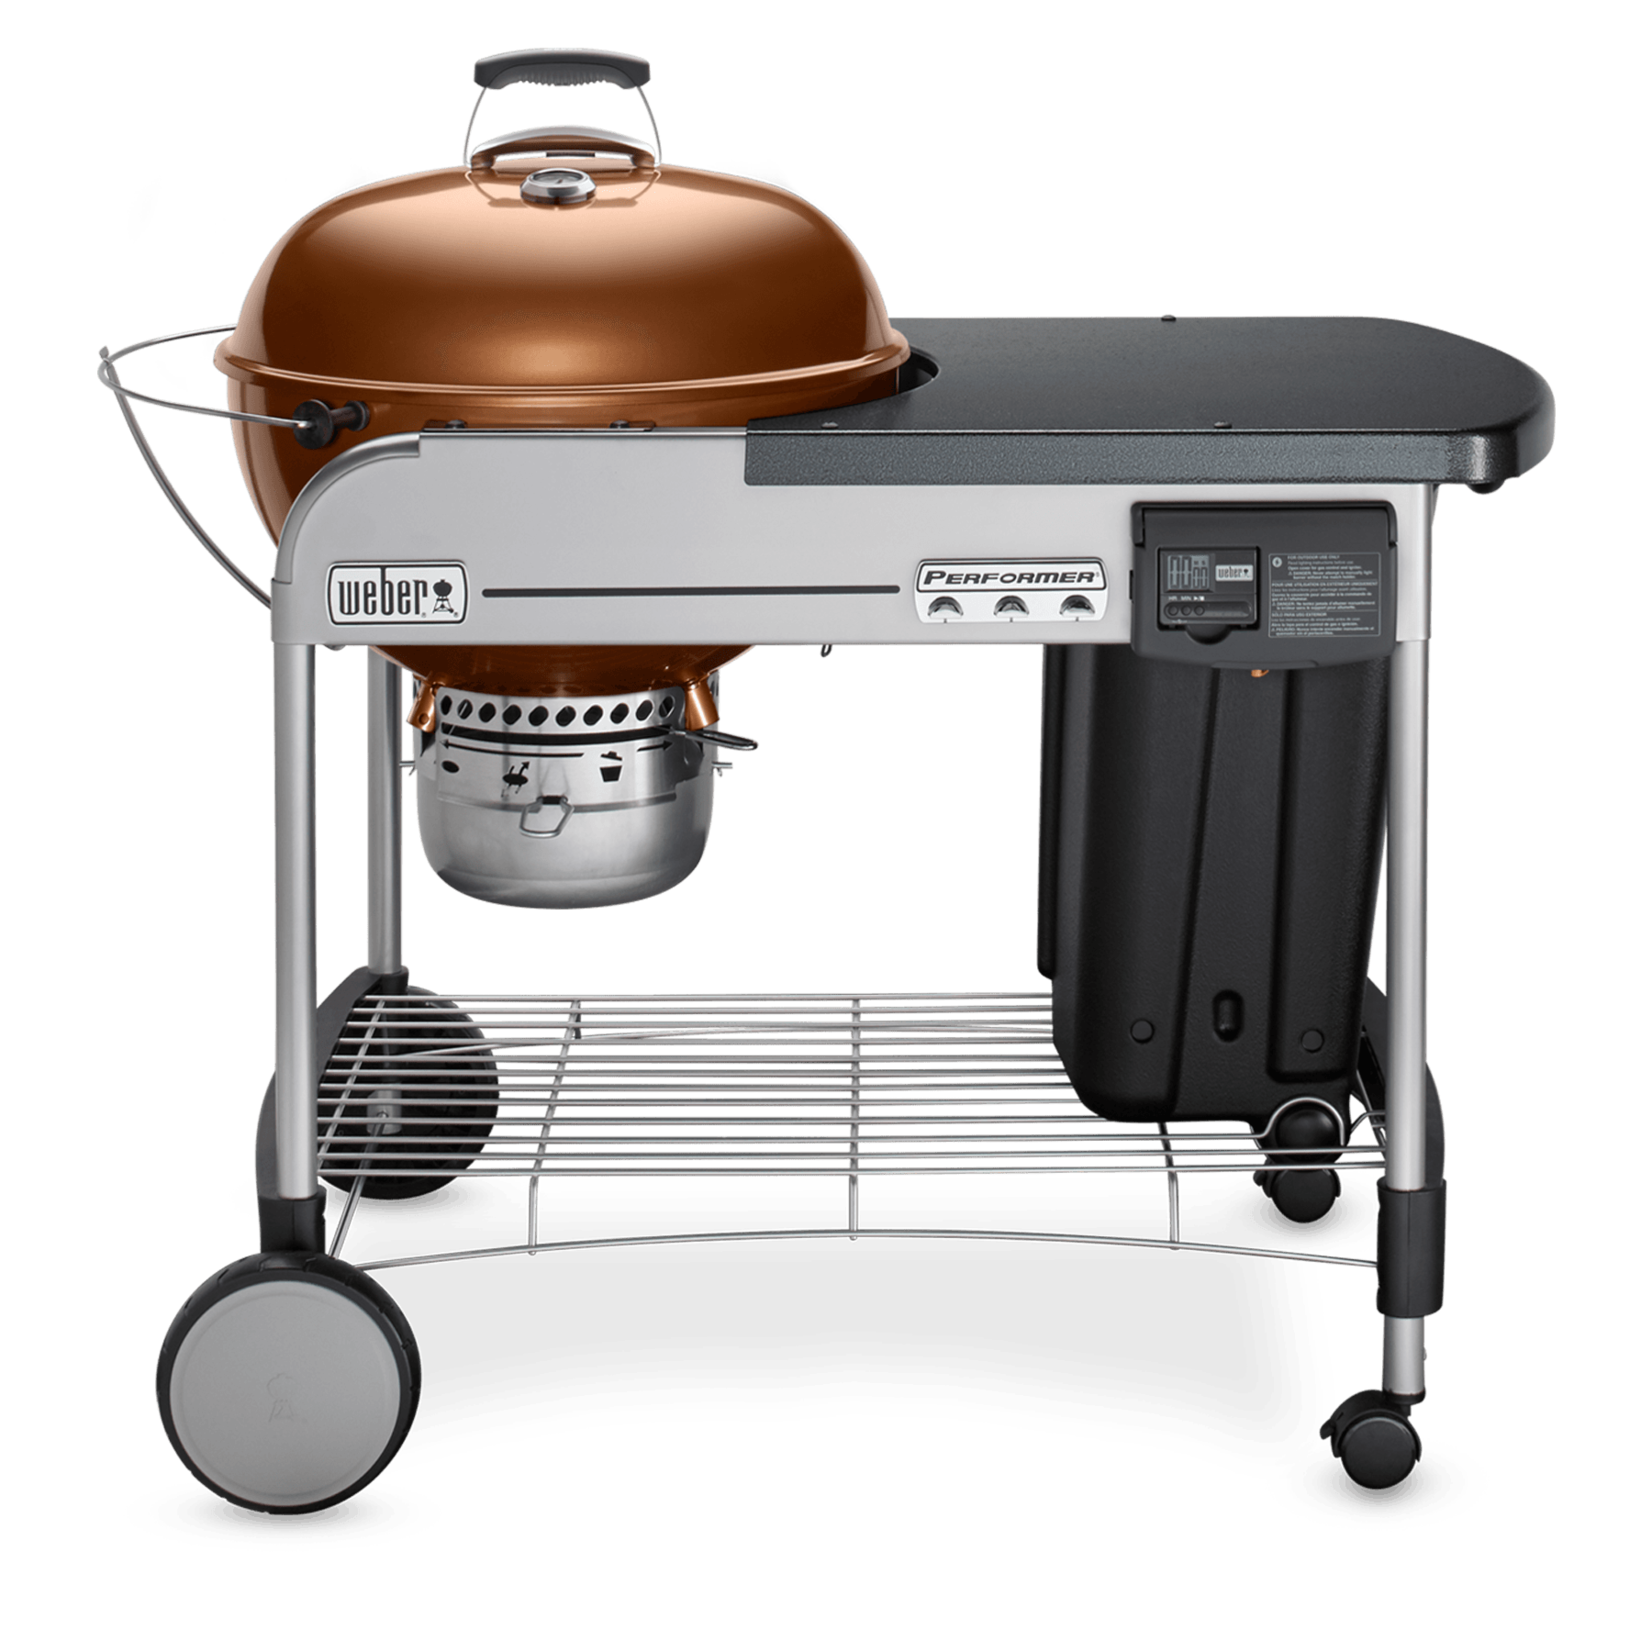 Weber Performer Deluxe 22" Charcoal Grill, Copper